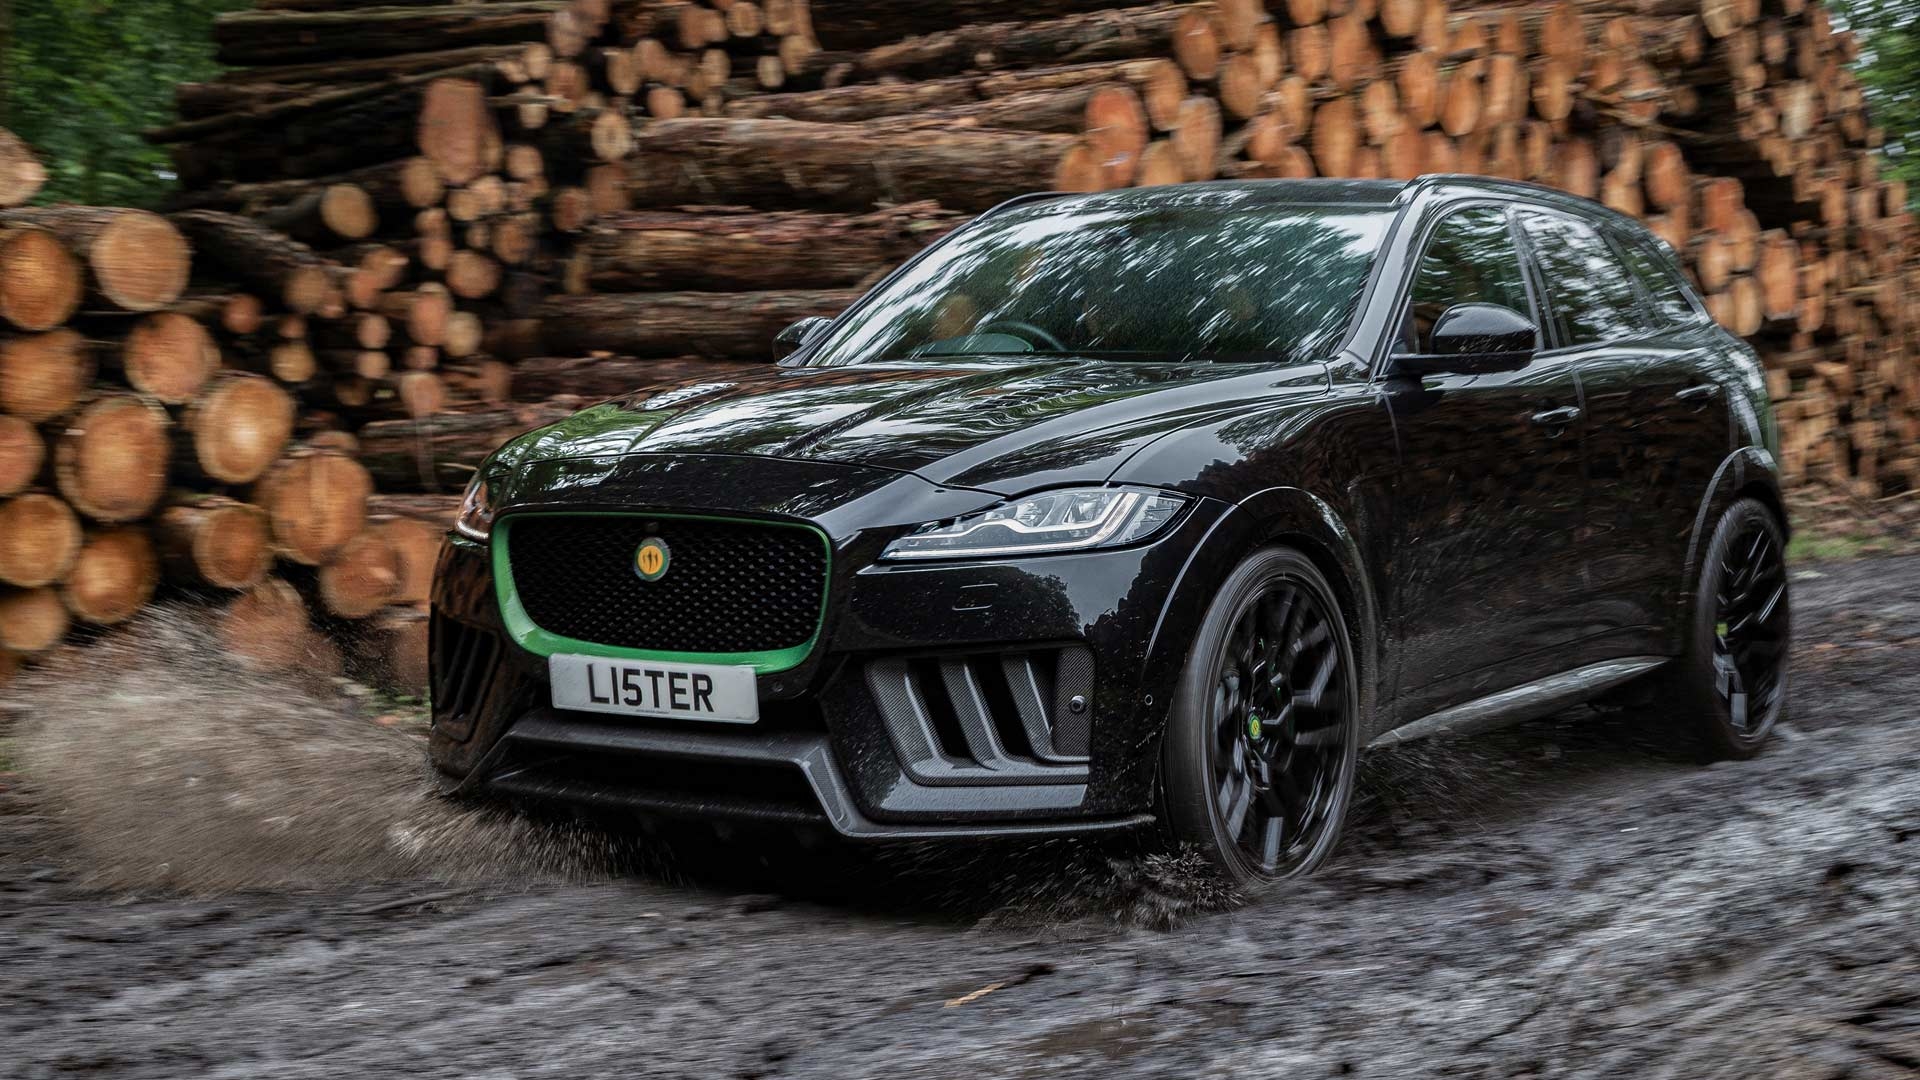 Lister Stealth Fastest SUV in UK